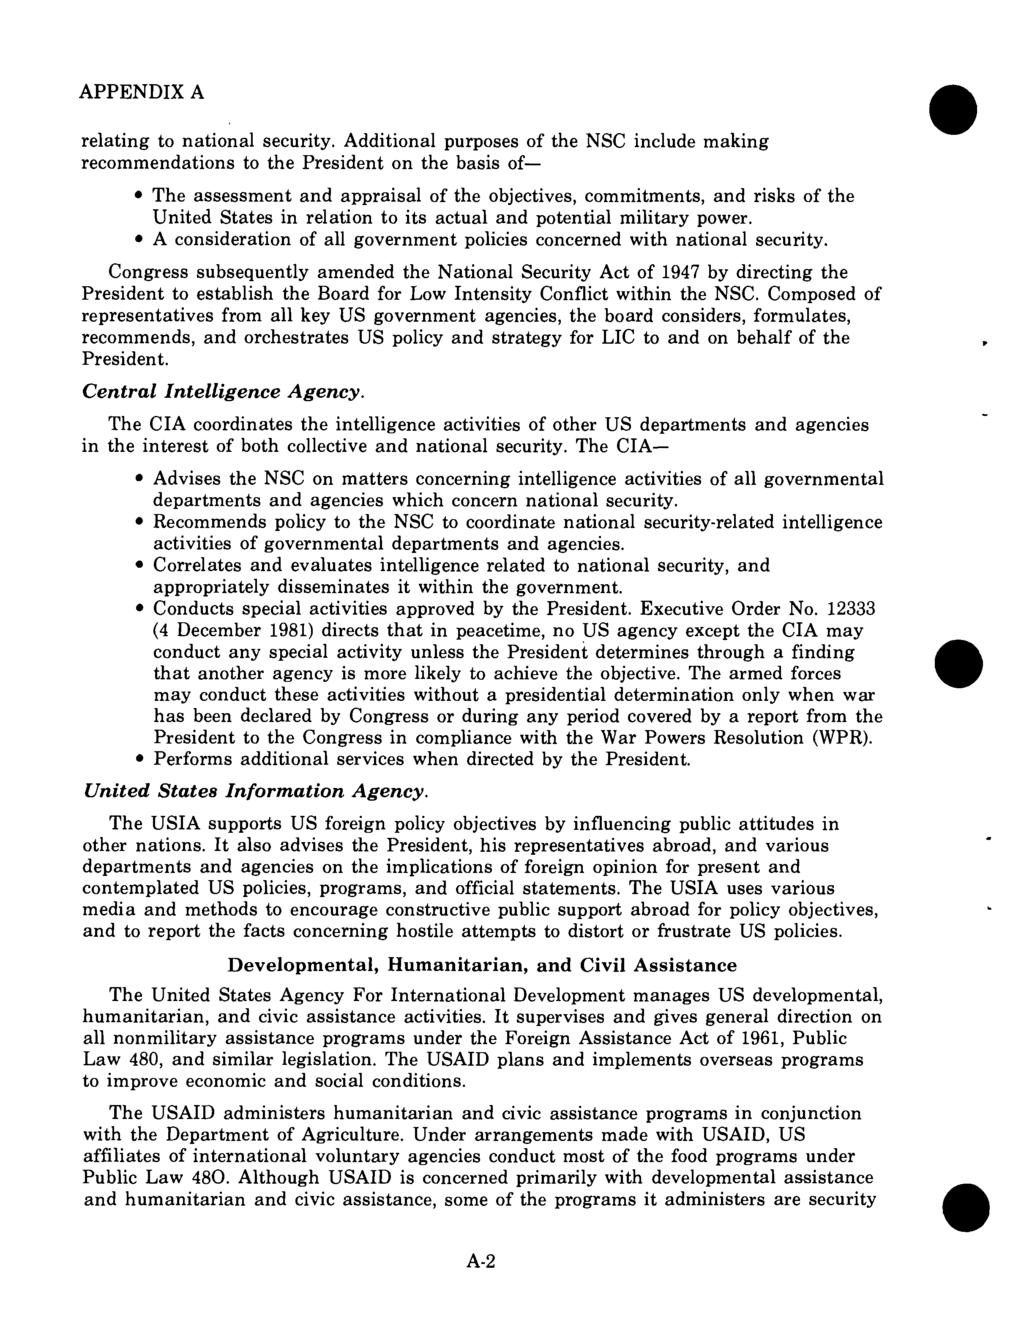 APPENDIX A relating to national security.